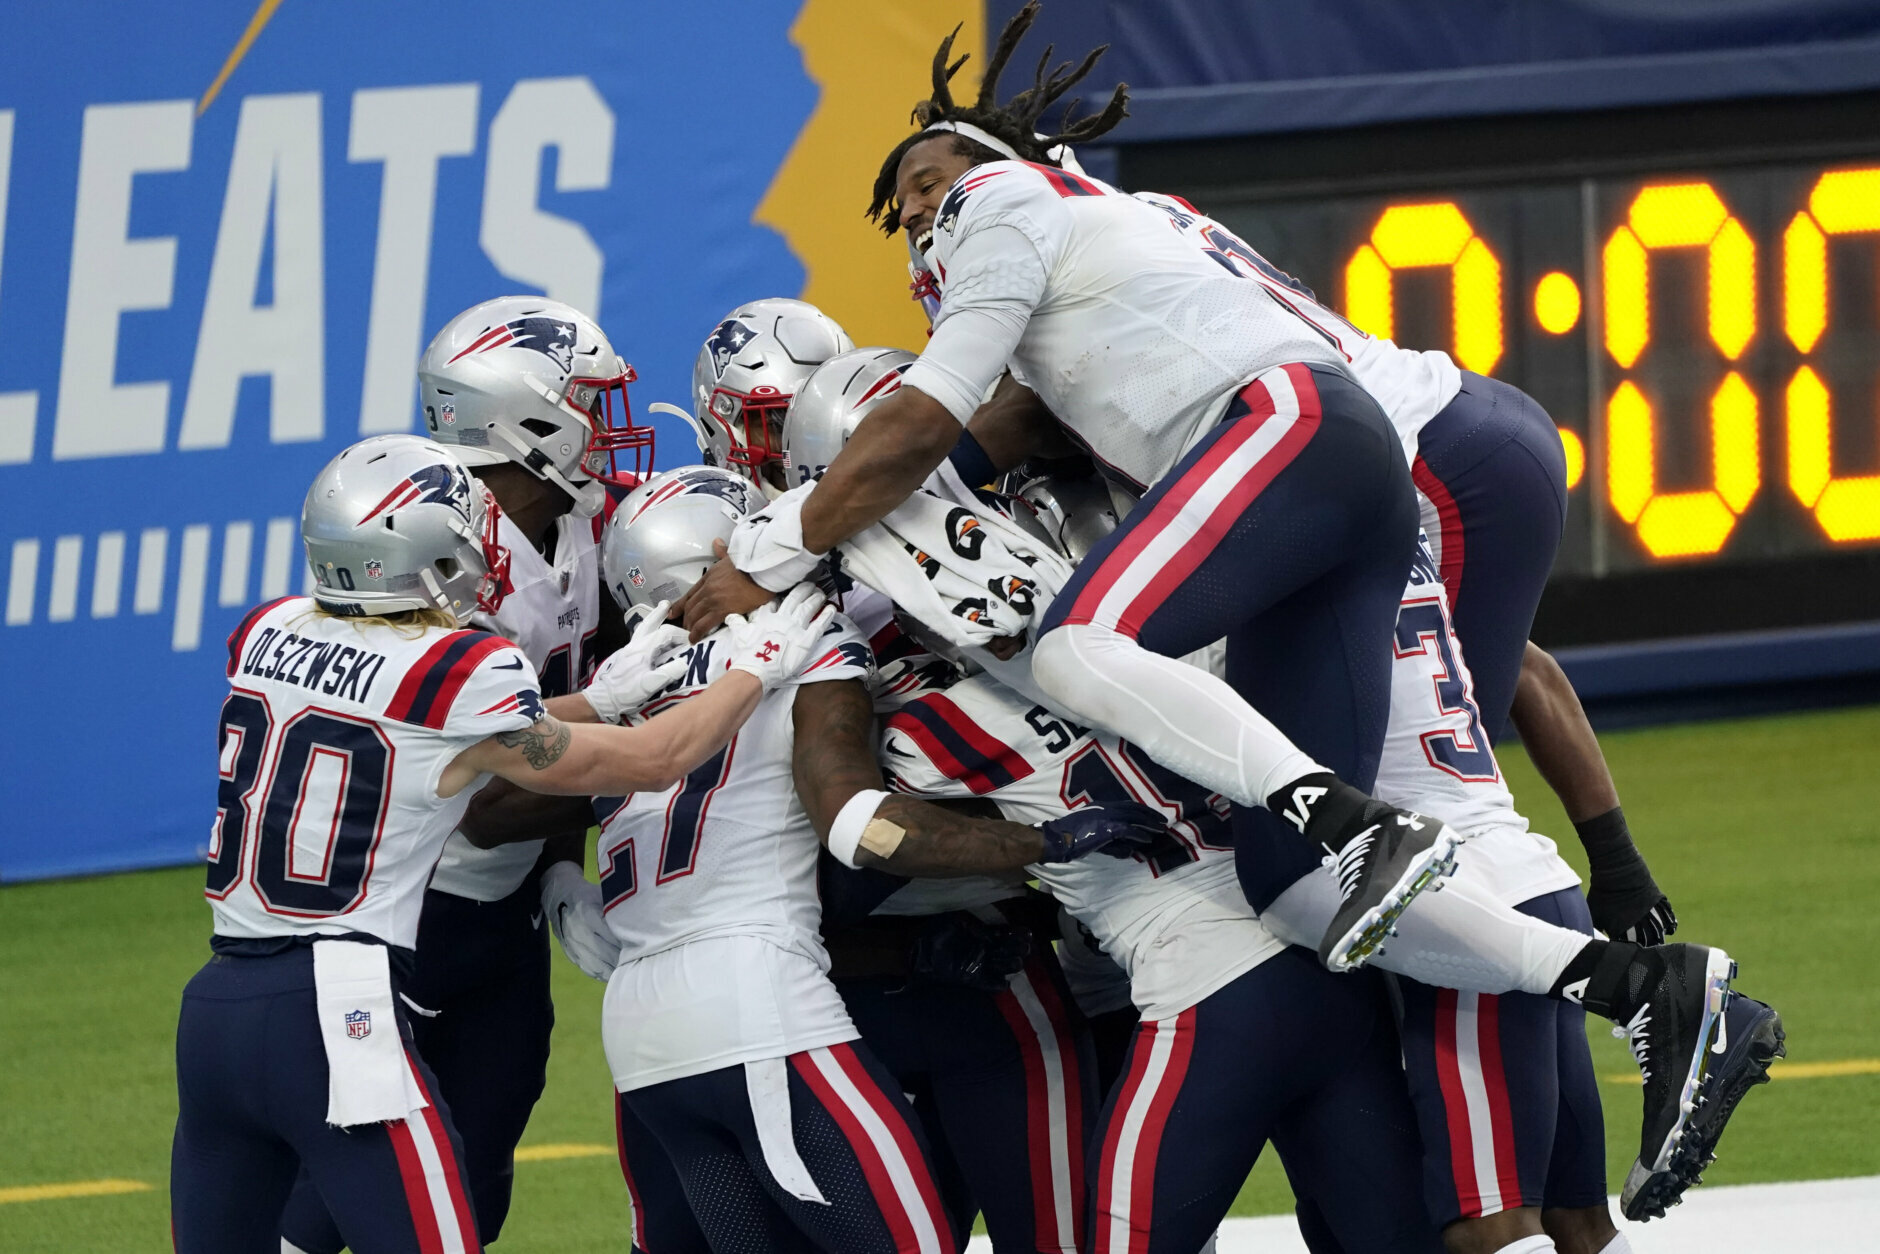 <p><b><i>Patriots 45</i></b><br />
<b><i>Chargers 0</i></b></p>
<p>Man, this isn&#8217;t even funny anymore. It just feels like piling on the poor Chargers.</p>
<p>The Bolts suffered their worst home loss in franchise history, giving up two special teams touchdowns to unlock another level of football hell previously believed to be unattainable. At this point, firing coach Anthony Lynn would be a mercy.</p>
<p>On the other sideline, <a href="https://twitter.com/ESPNStatsInfo/status/1335750877005688832?s=20">&#8220;Blowout Bill&#8221; Belichick</a> put a stop to <a href="https://profootballtalk.nbcsports.com/2020/12/04/justin-herbert-closing-in-on-nfl-rookie-record-for-passing-touchdowns/">Justin Herbert&#8217;s record-setting pace</a> — which was absolutely necessary, since the Pats offense almost got as many passing yards (61) from backup Jarrett Stidham&#8217;s three attempts as Cam Newton&#8217;s 69 yards on 19 throws. Even as Cam became the first quarterback with double digit multi-rush TD games, it&#8217;s growing obvious New England will go in another direction in 2021.</p>
